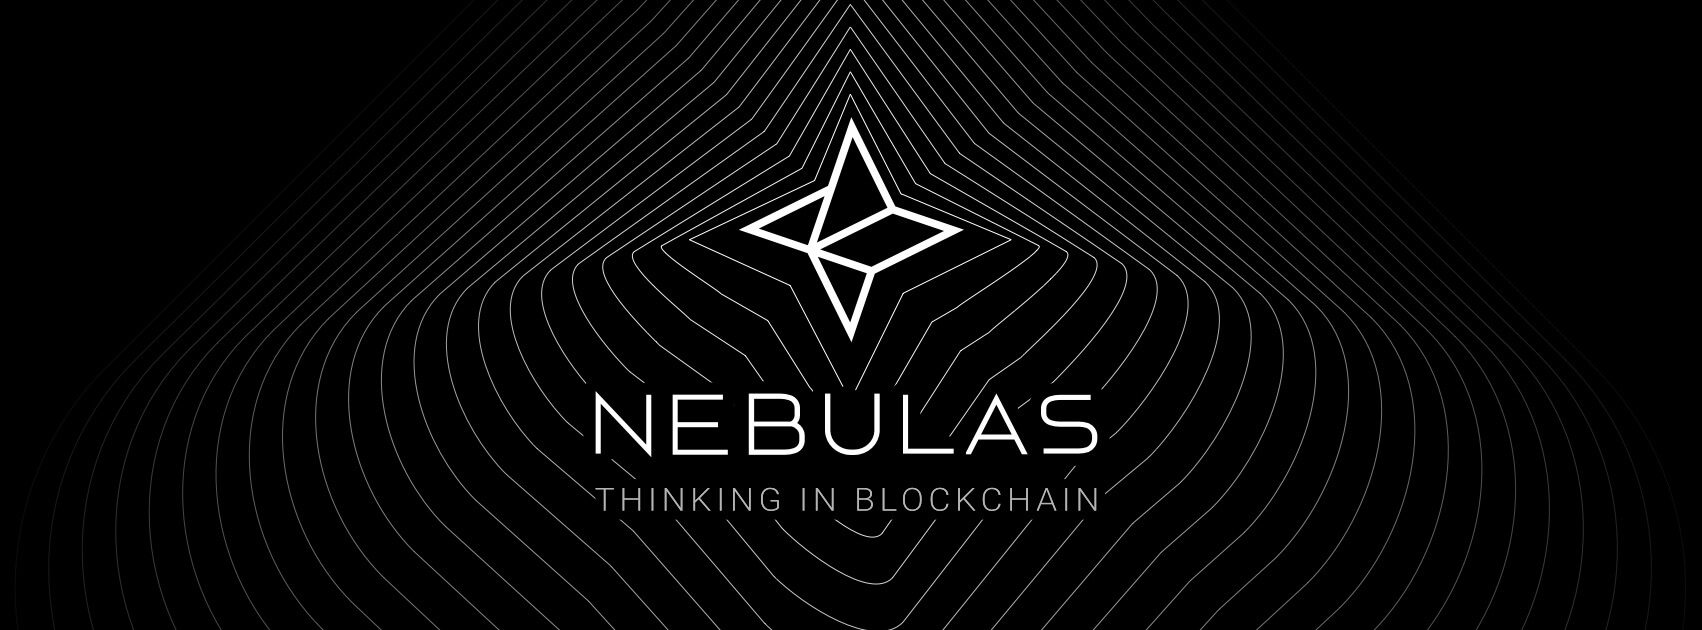 Nebulas Sets New Precedent By Extending Teams Token Distribution To 10 Years